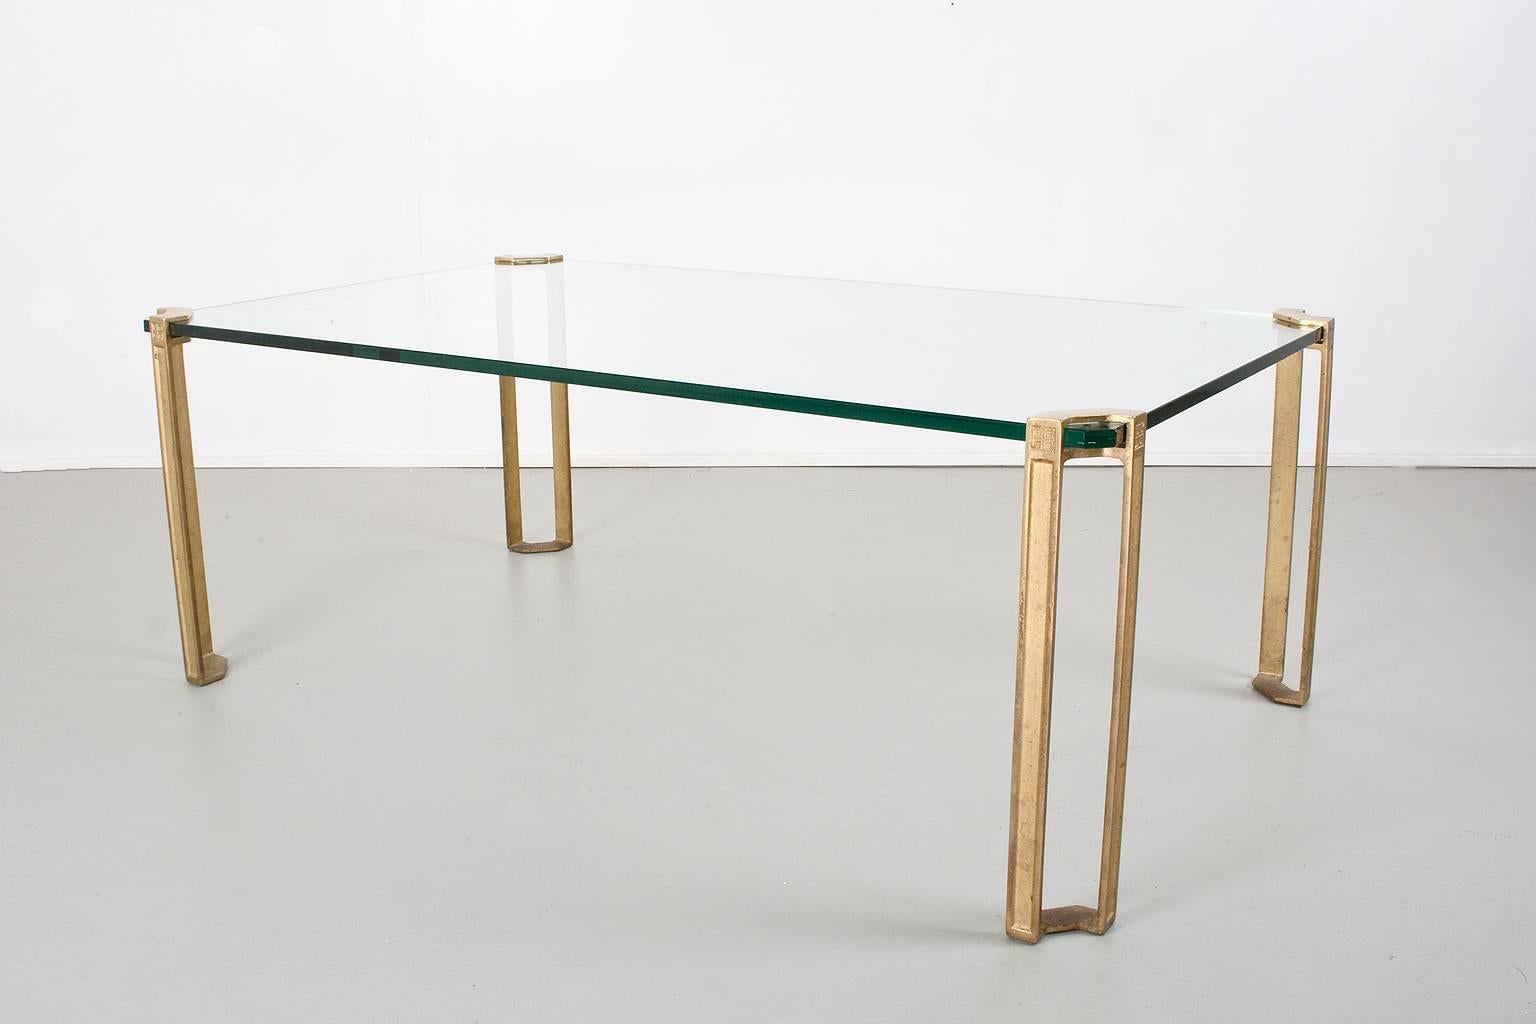 Peter Ghyczy glass and brass table, circa 1970. The table is made from glass (1.5cm thick) and sand casted brass. The legs are hand casted. The brass has typical characteristics of the casting process.

After the Hungarian revolution Peter Ghyczy